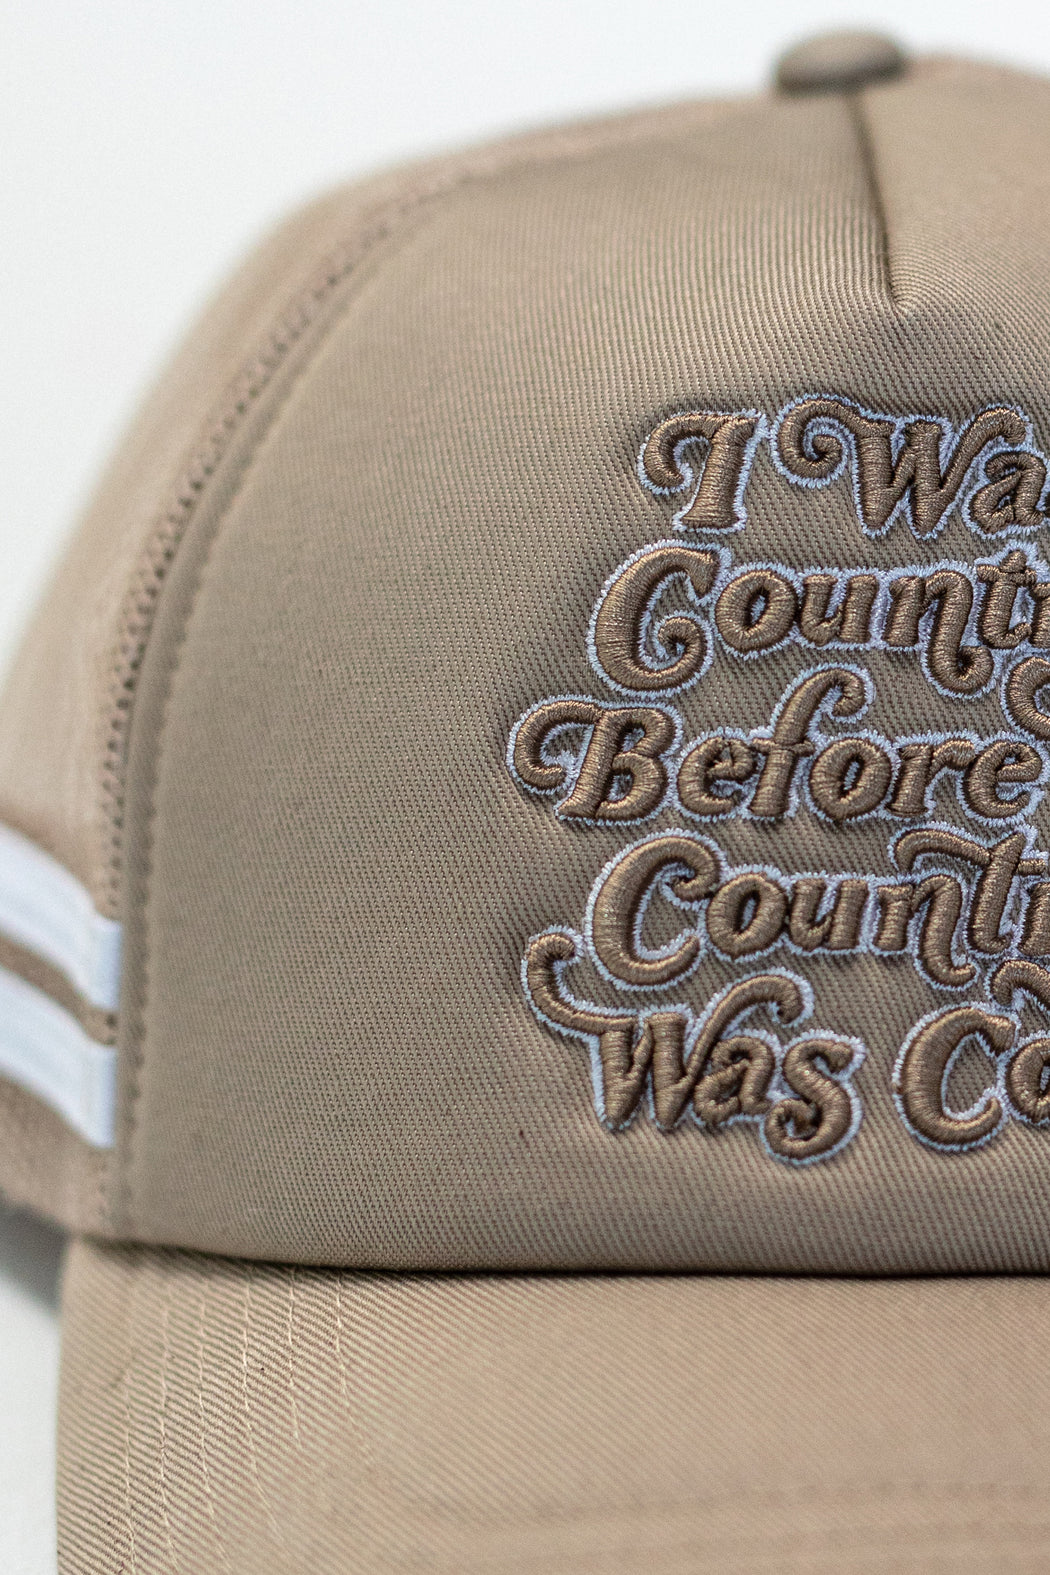 COUNTRY COOL TRUCKER HAT IN TAN